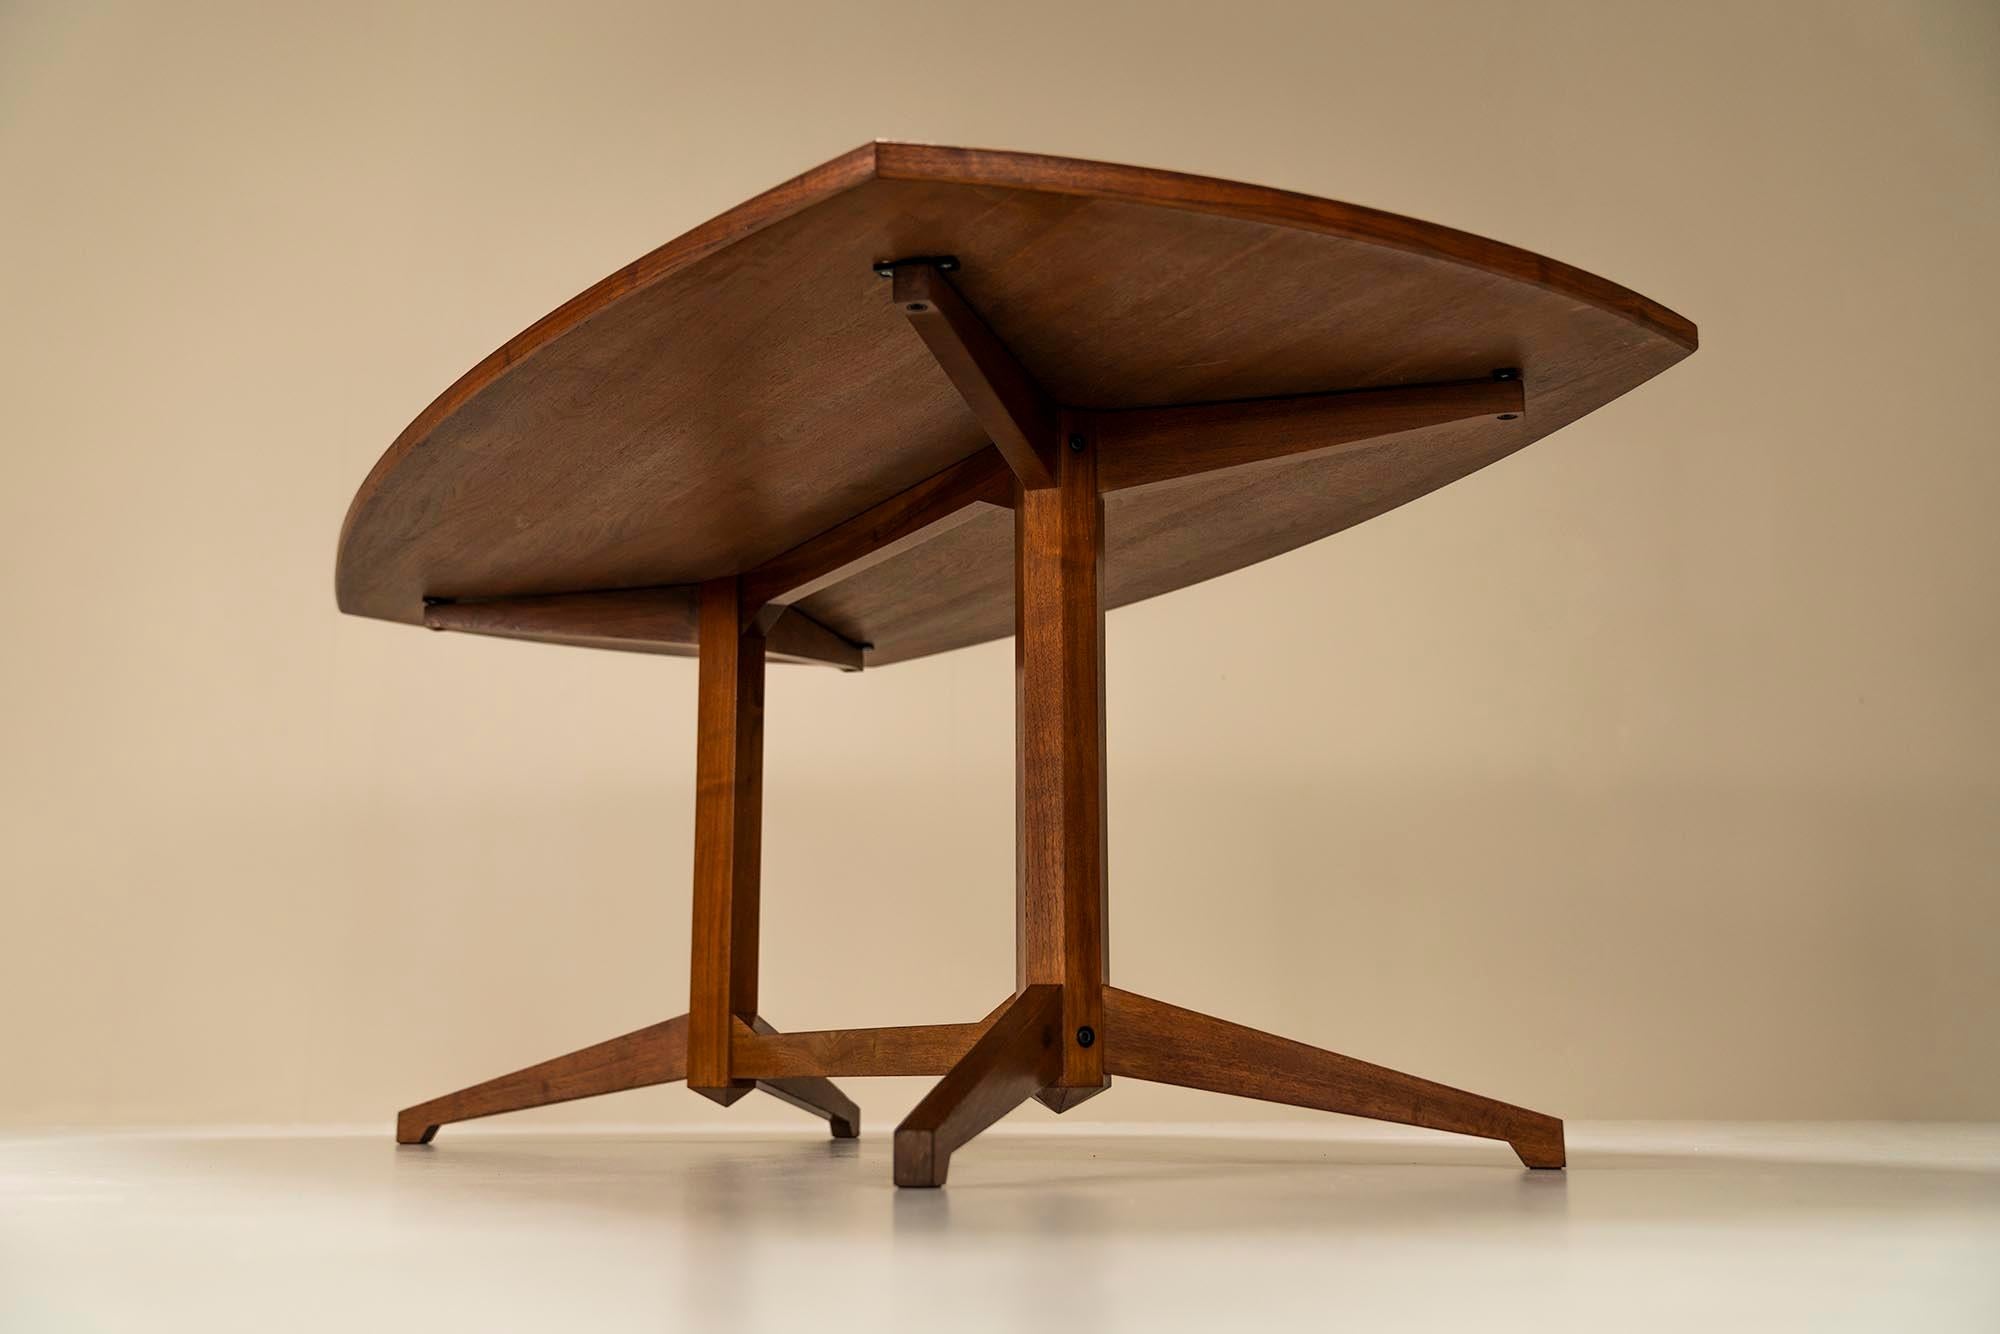 Italian Dining Table, Model TL22, in Mahogany by Albini & Helg for Poggi, Italy 1958 For Sale